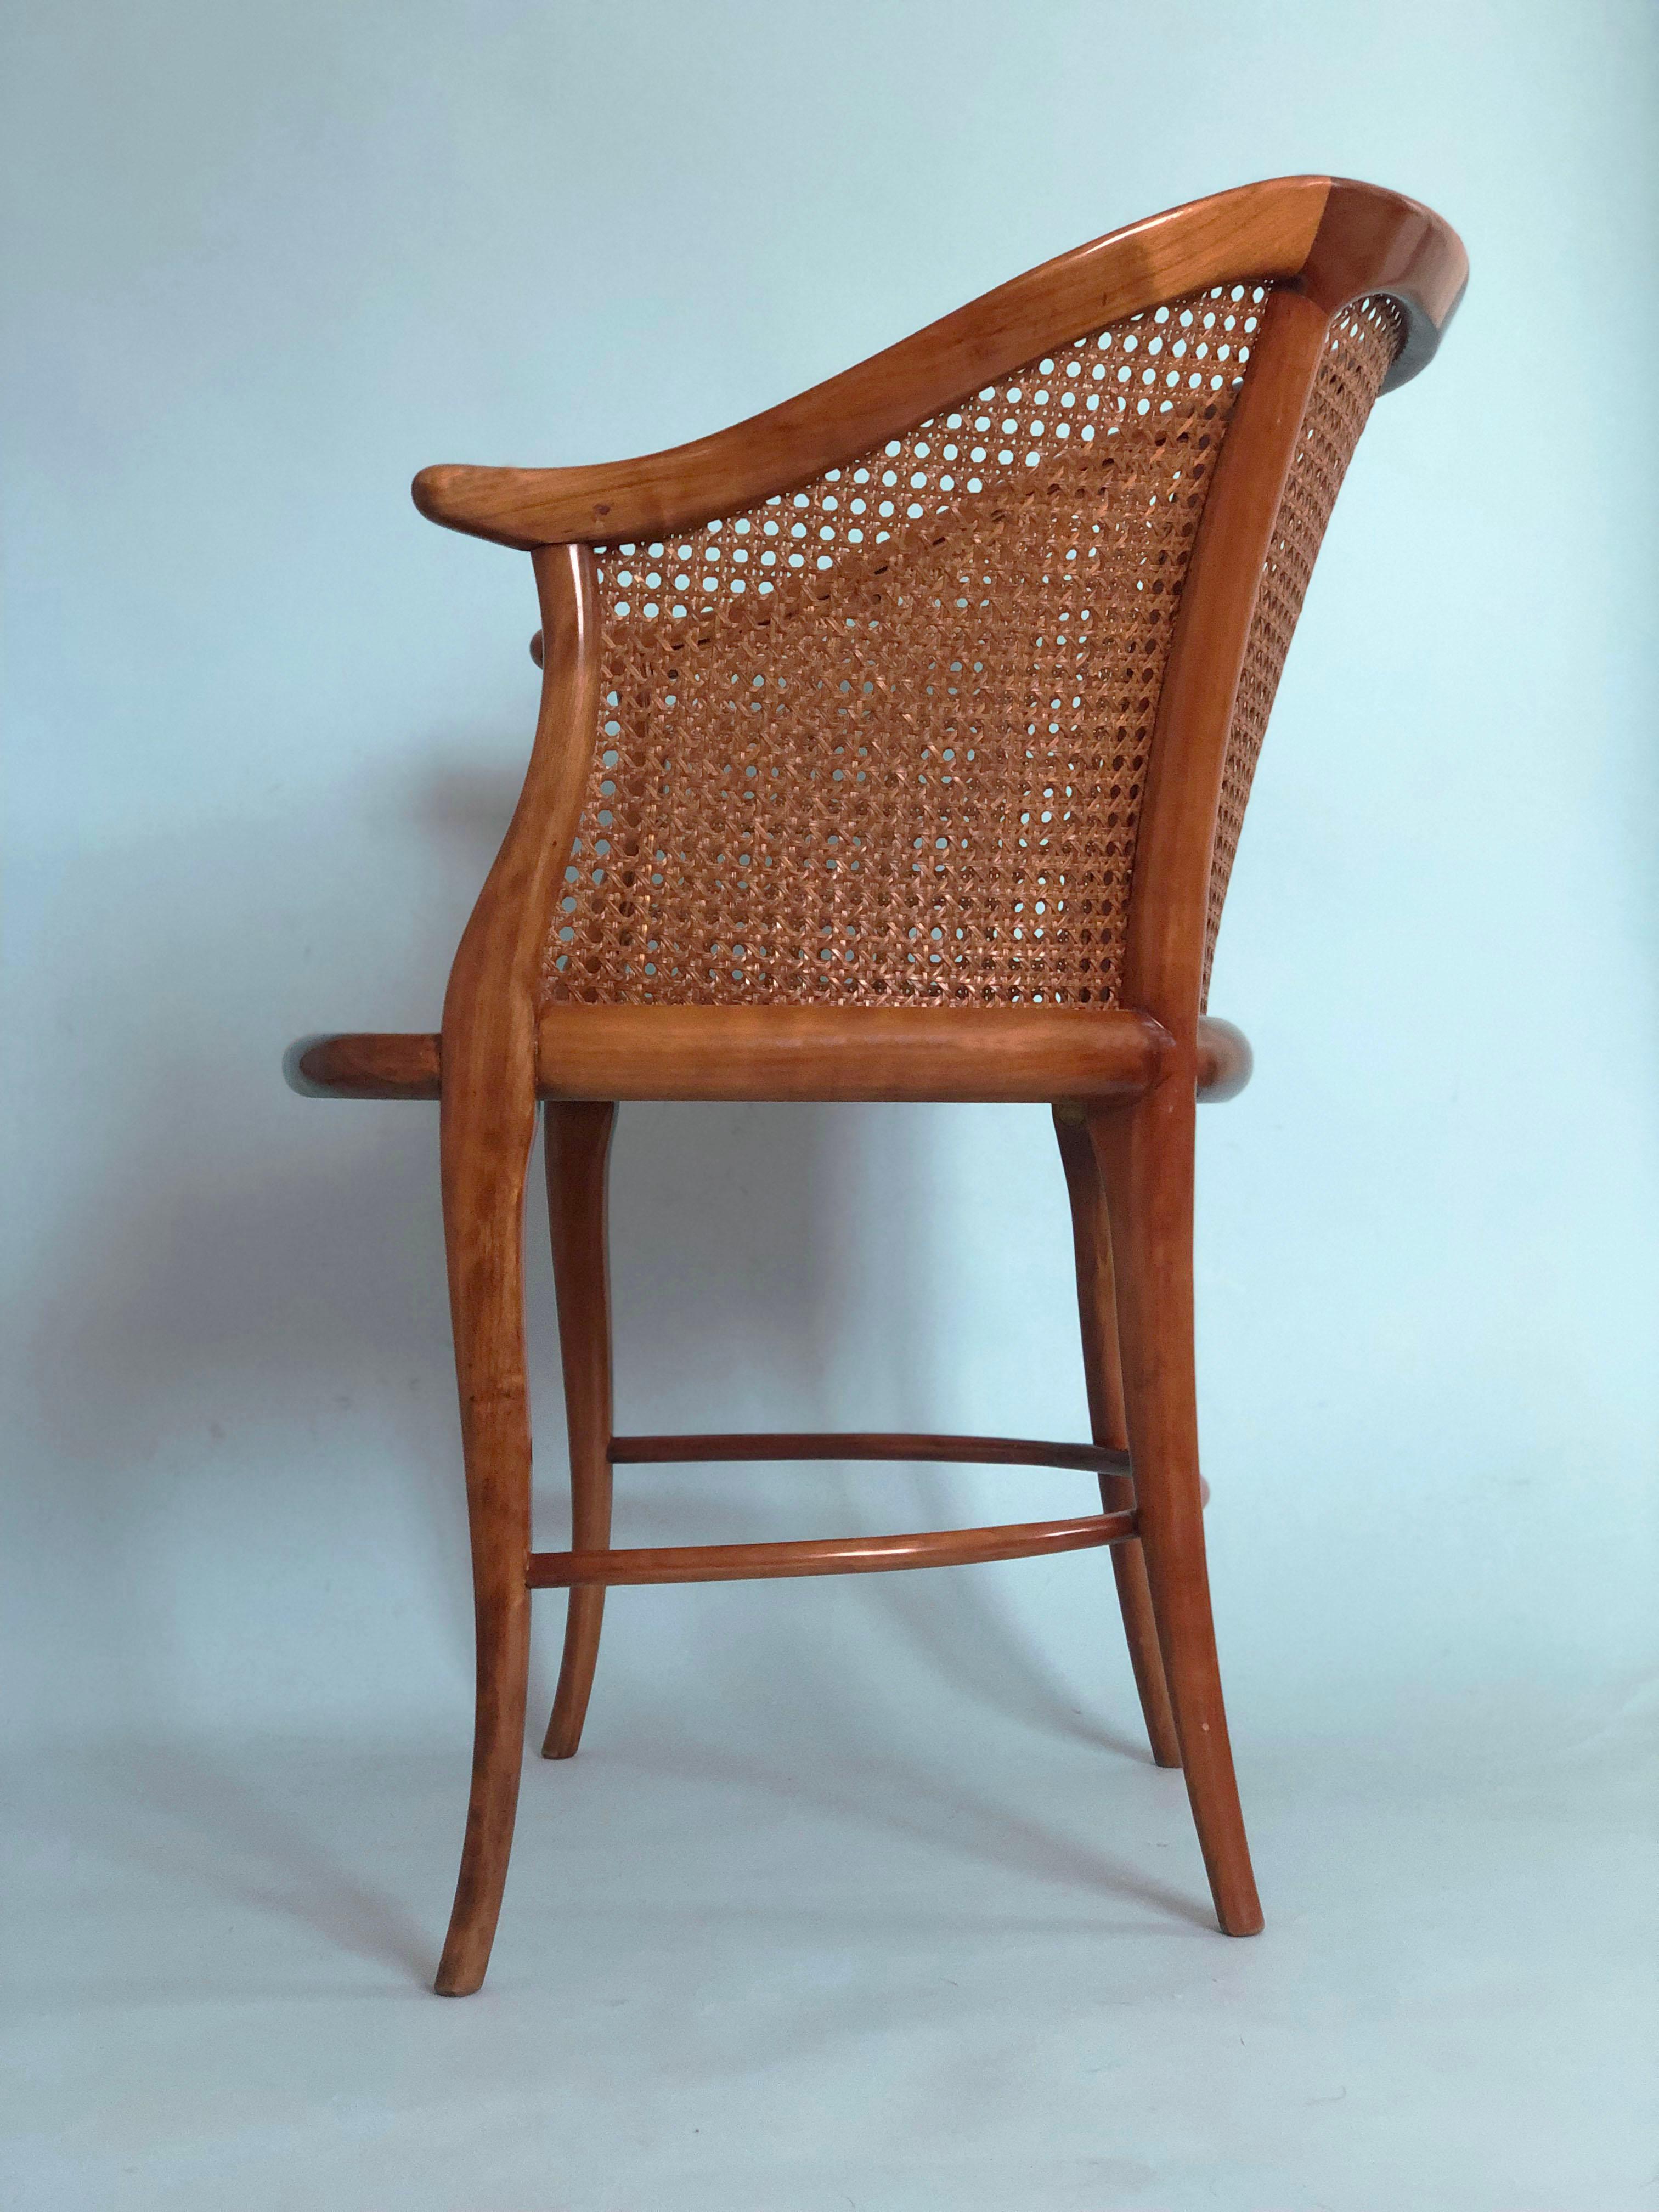 Caning Annibale Colombo Chair Cherry Wood Italy 1990s